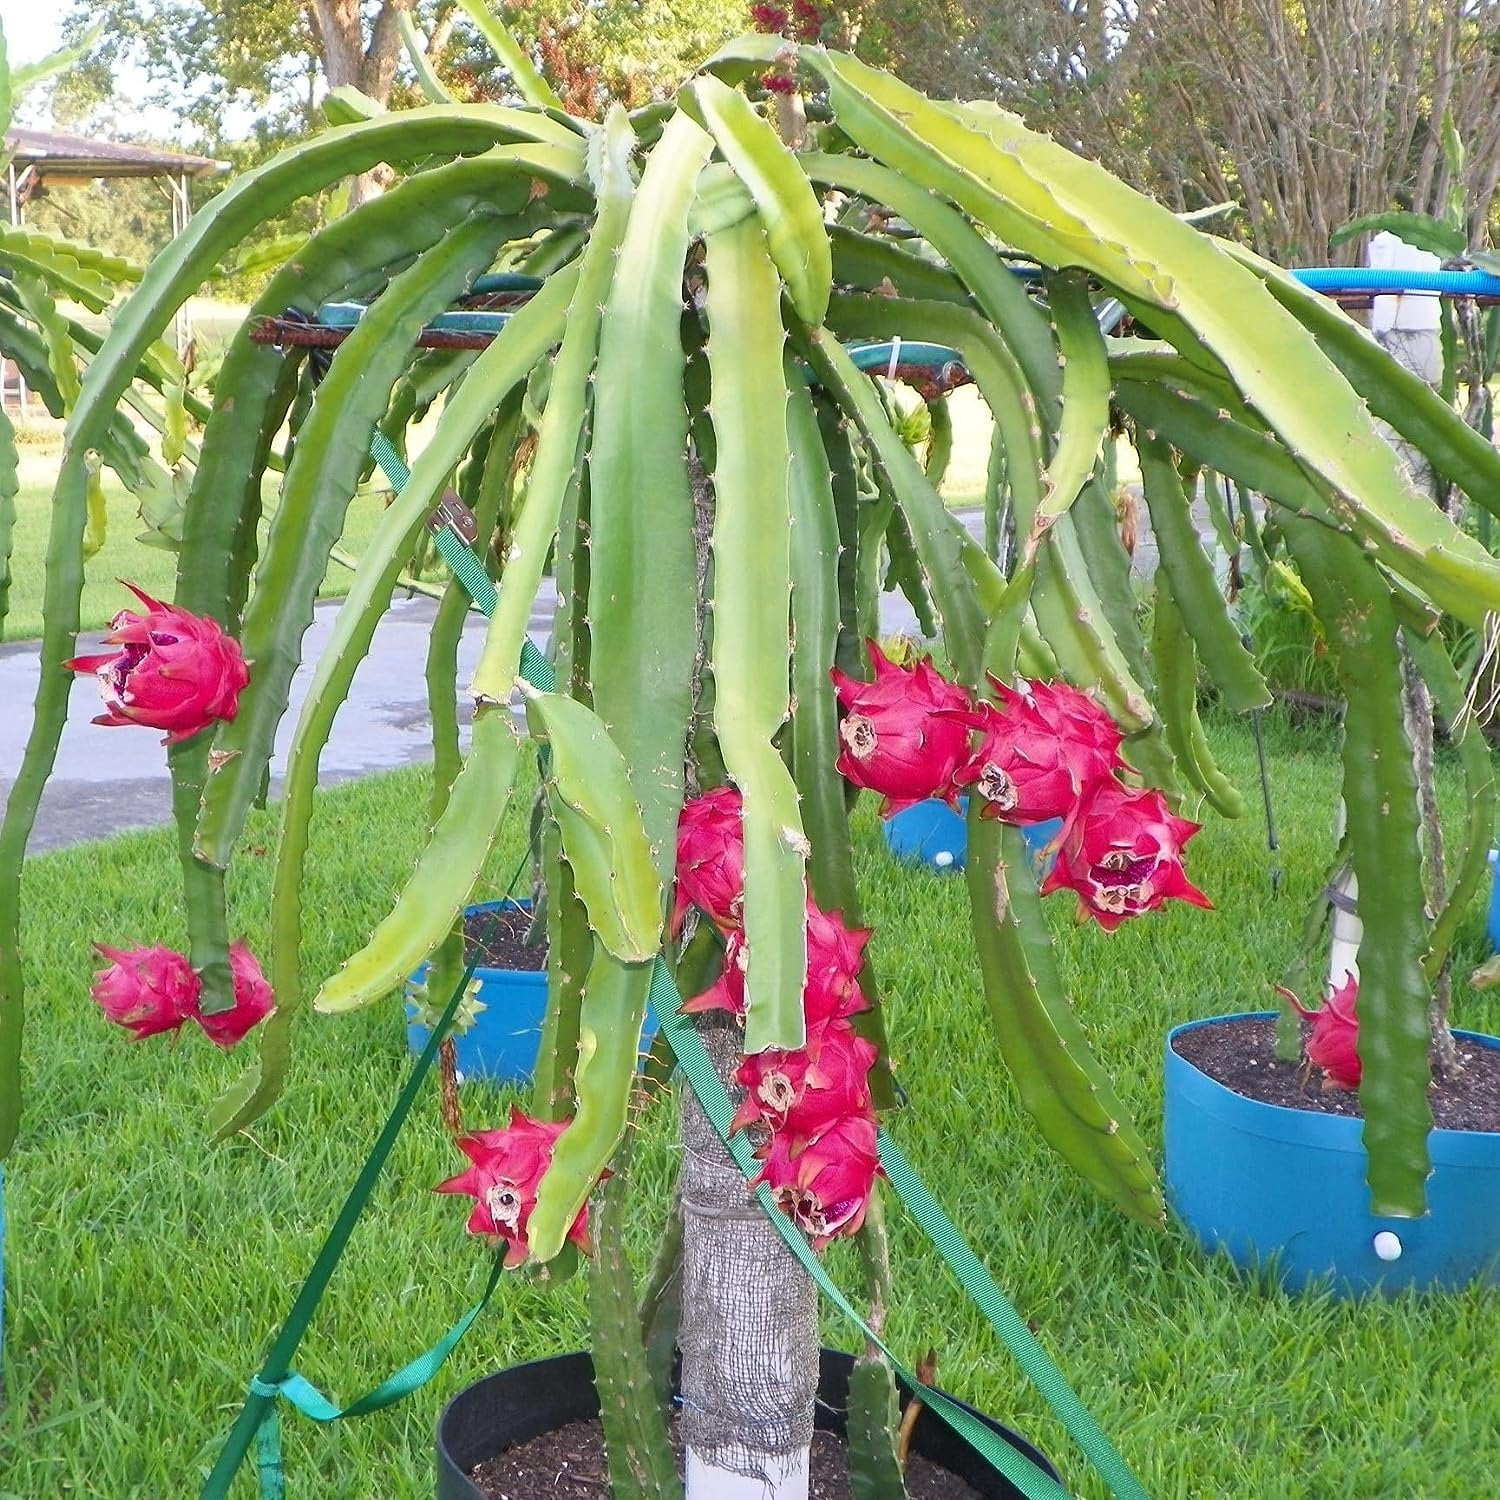 Wekiva Foliage Edgar's Baby Dragon Fruit Tree - 4 Live Starter Plants -  Hylocereous Undatus - Edible Tropical Fruit Plant from Florida  EdgarsBabyDragonFruitTree2x4 - The Home Depot